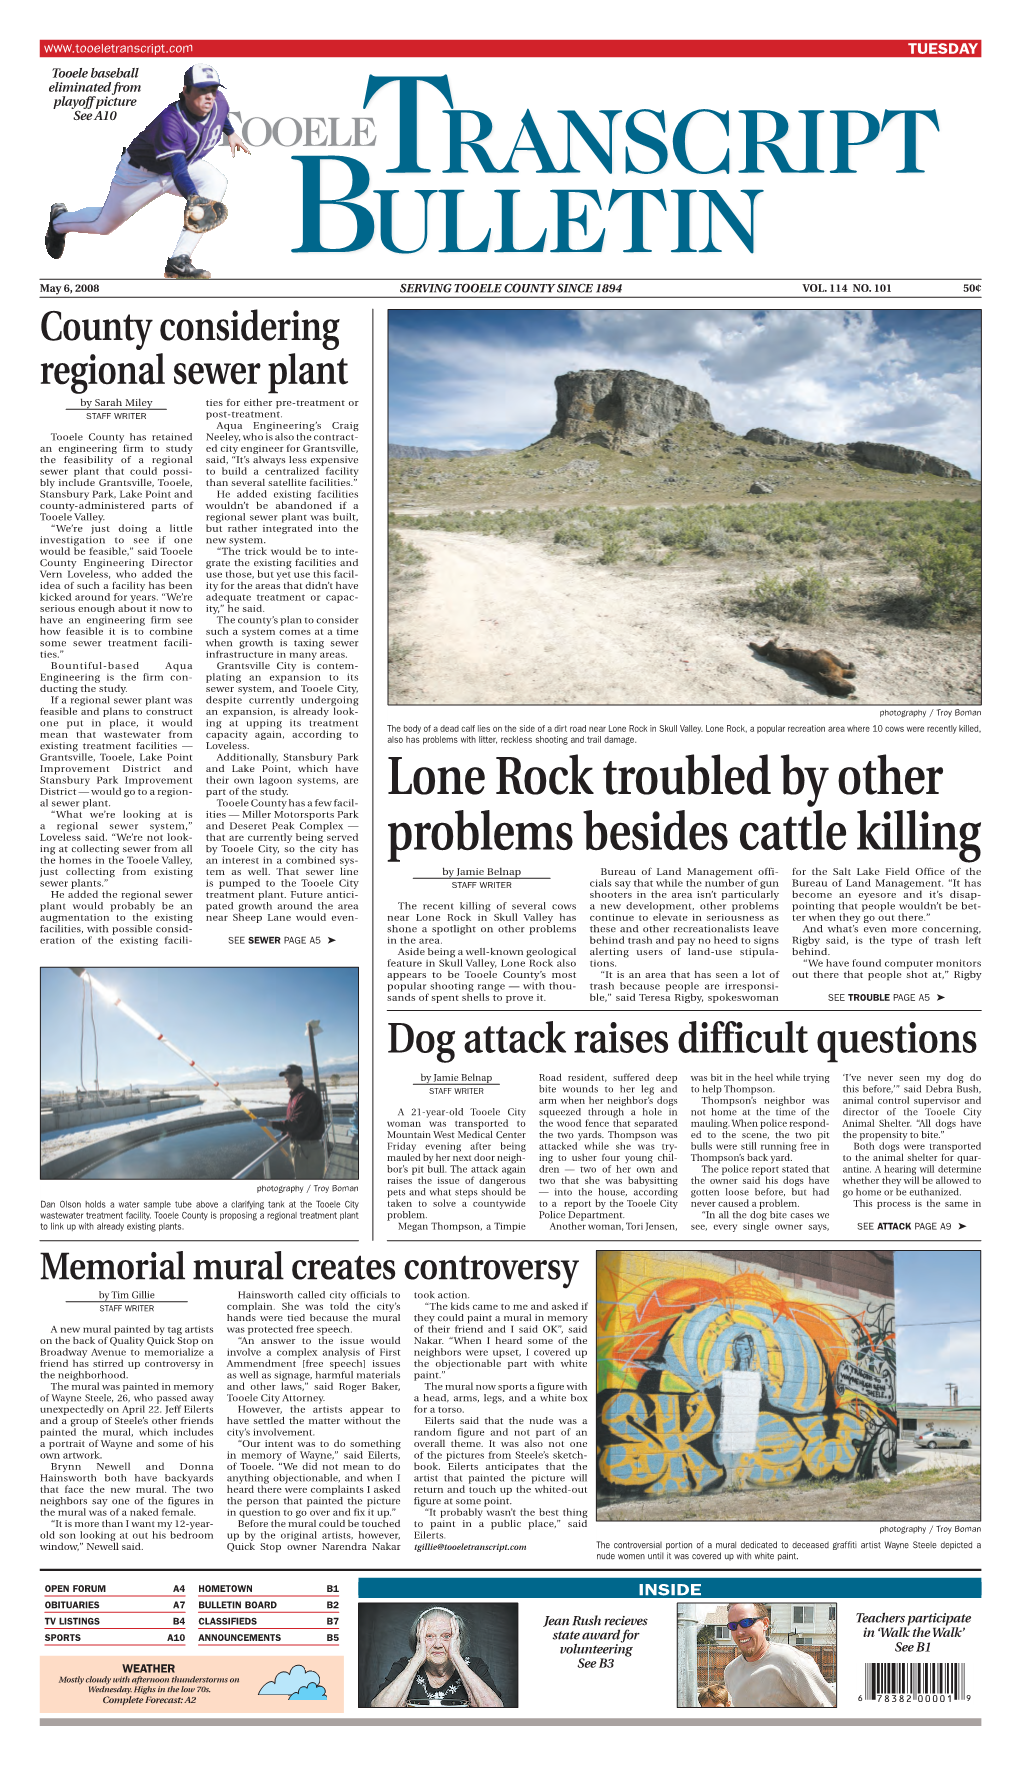 Lone Rock Troubled by Other Problems Besides Cattle Killing